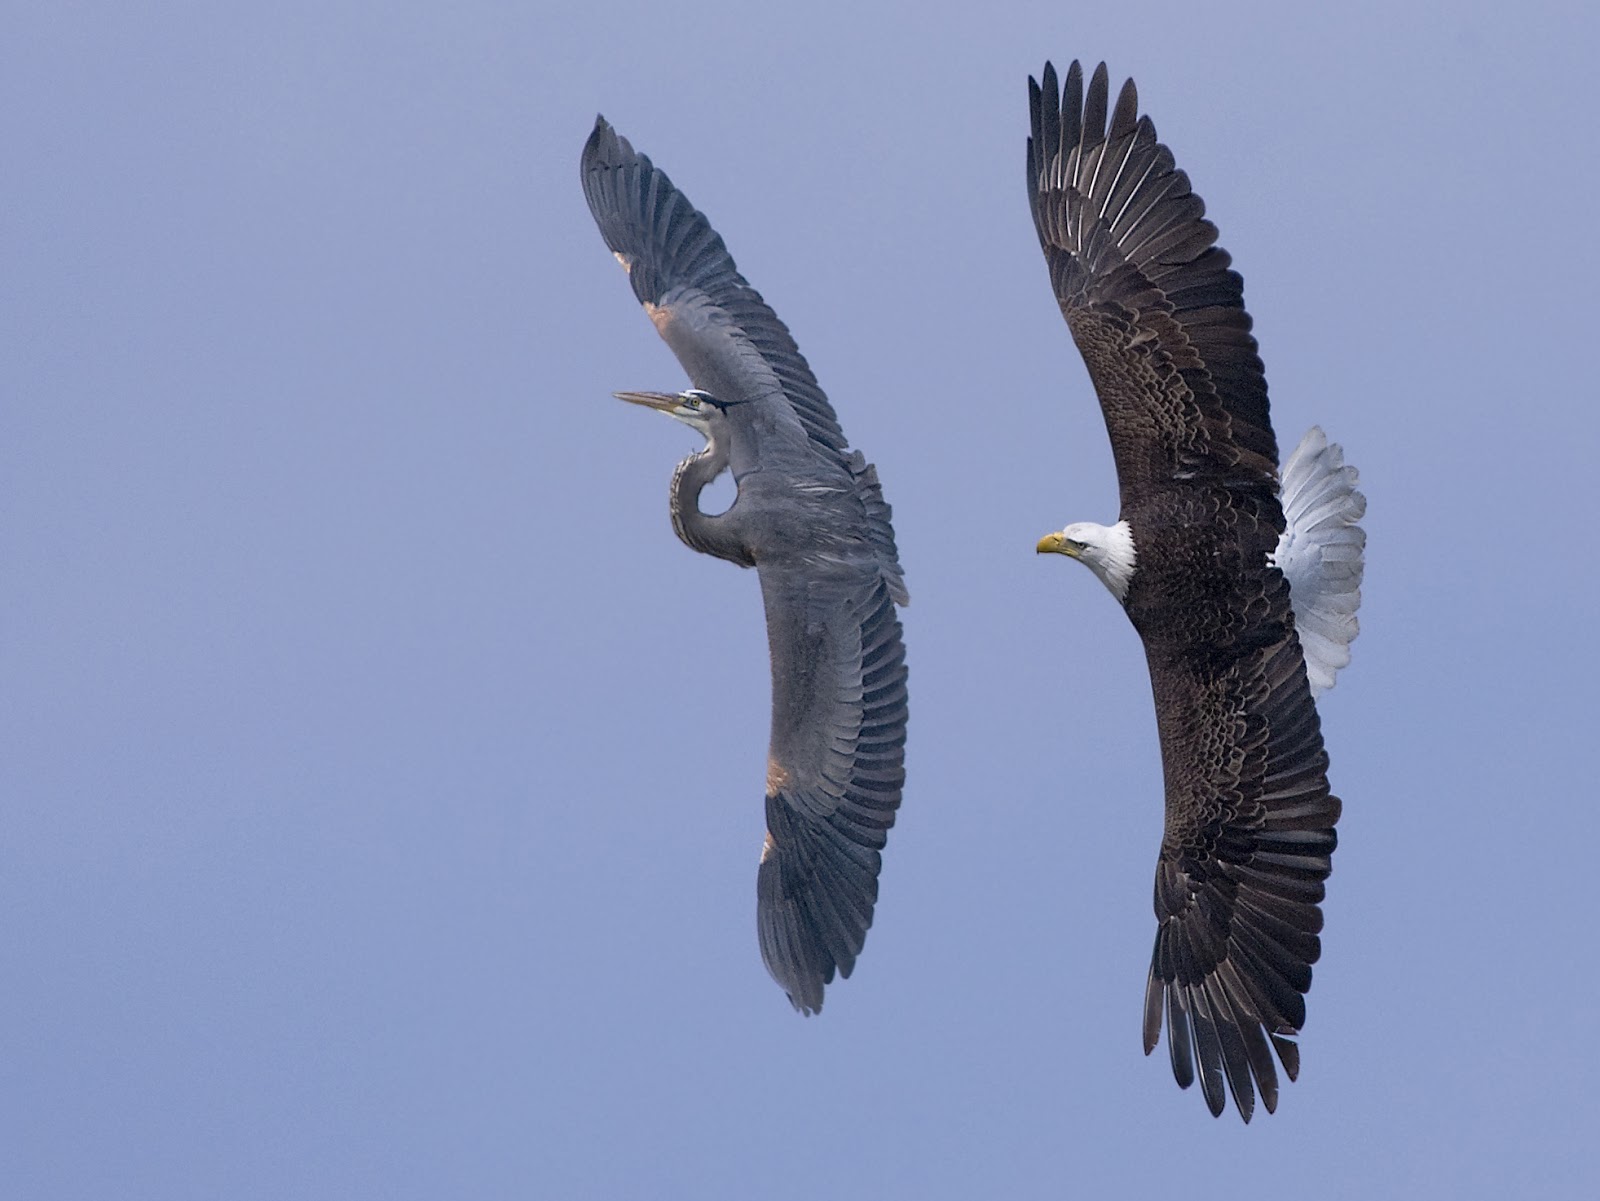 The Story of the Bald Eagle and Great Blue Heron